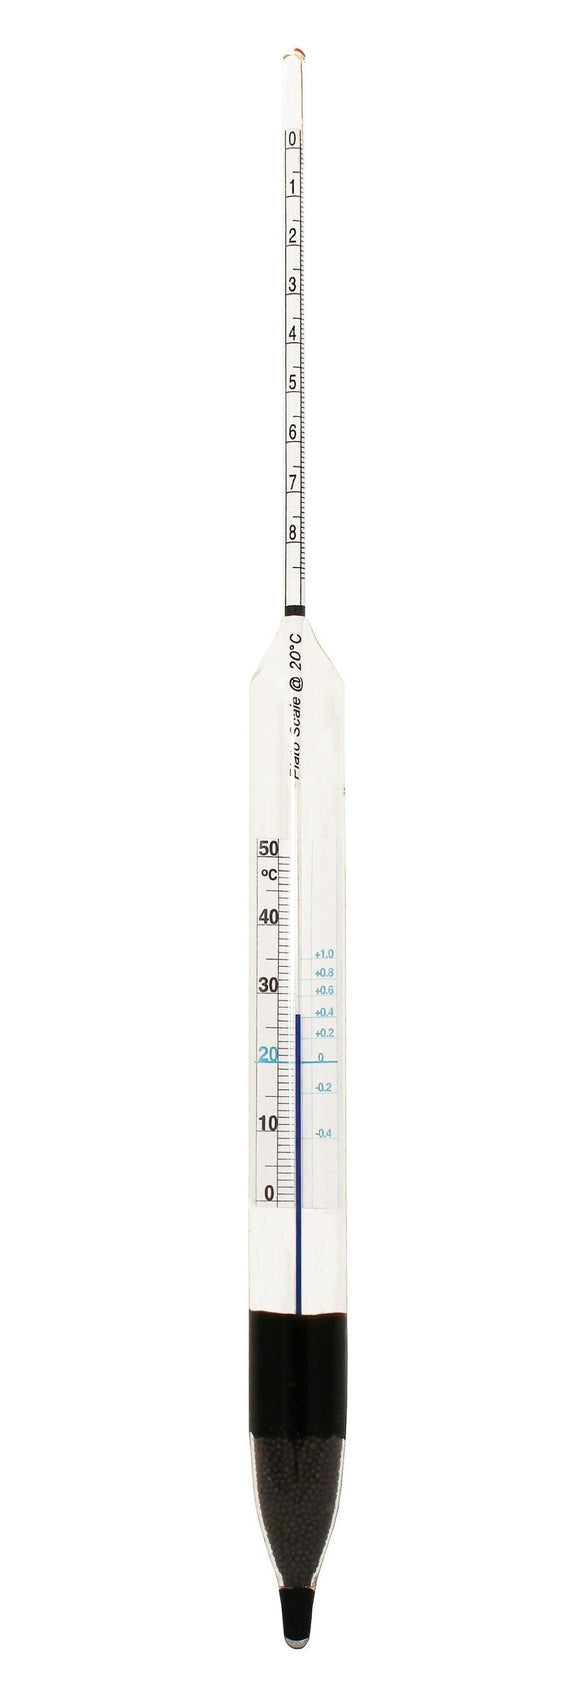 Plato Hydrometers with Thermometer from VEE GEE Scientific